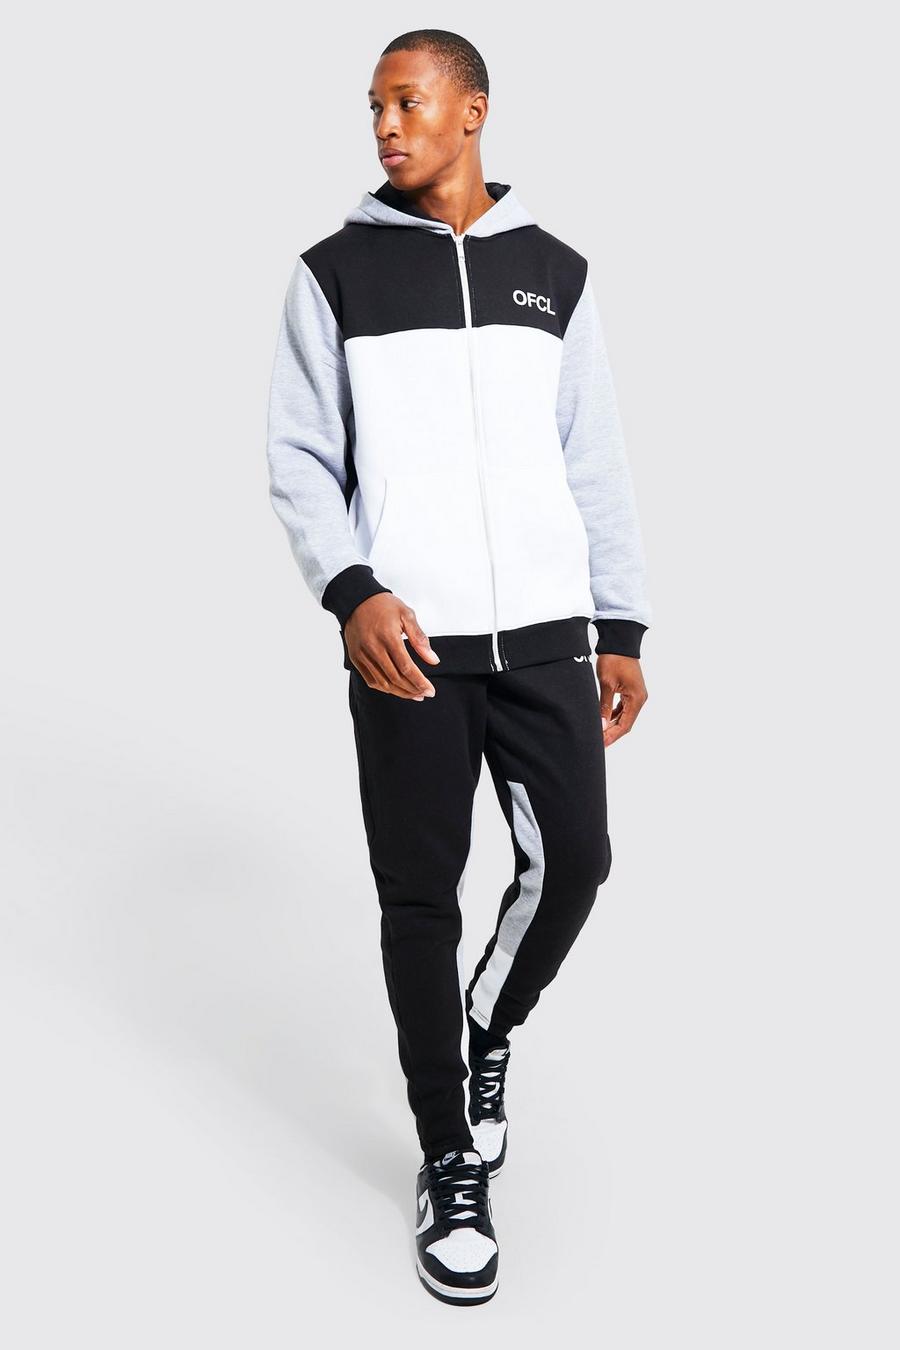 Grey marl grigio Ofcl Colour Block Zip Hooded Tracksuit